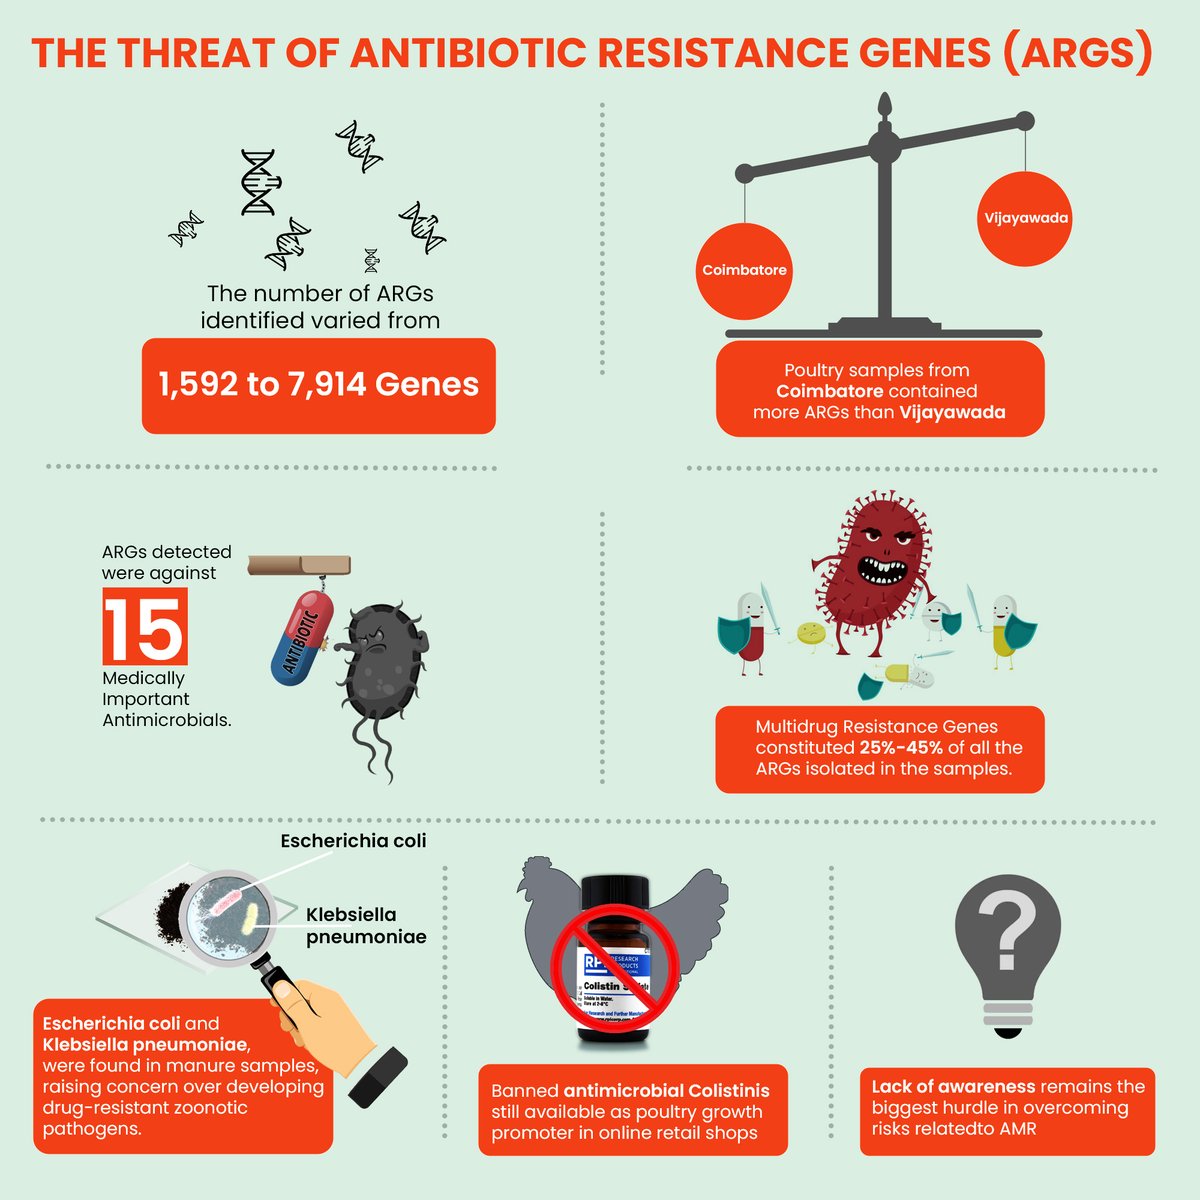 ARGs are genetic facilitators of AMR, causing bacteria, viruses, fungi and parasites to no longer respond to antimicrobial medicines. Read our recent study on ARGs in the Poultry Environment here: toxicslink.org/publications/r…
#AMR #antimicrobialresistance #ARGs #antibiotics #Poultry